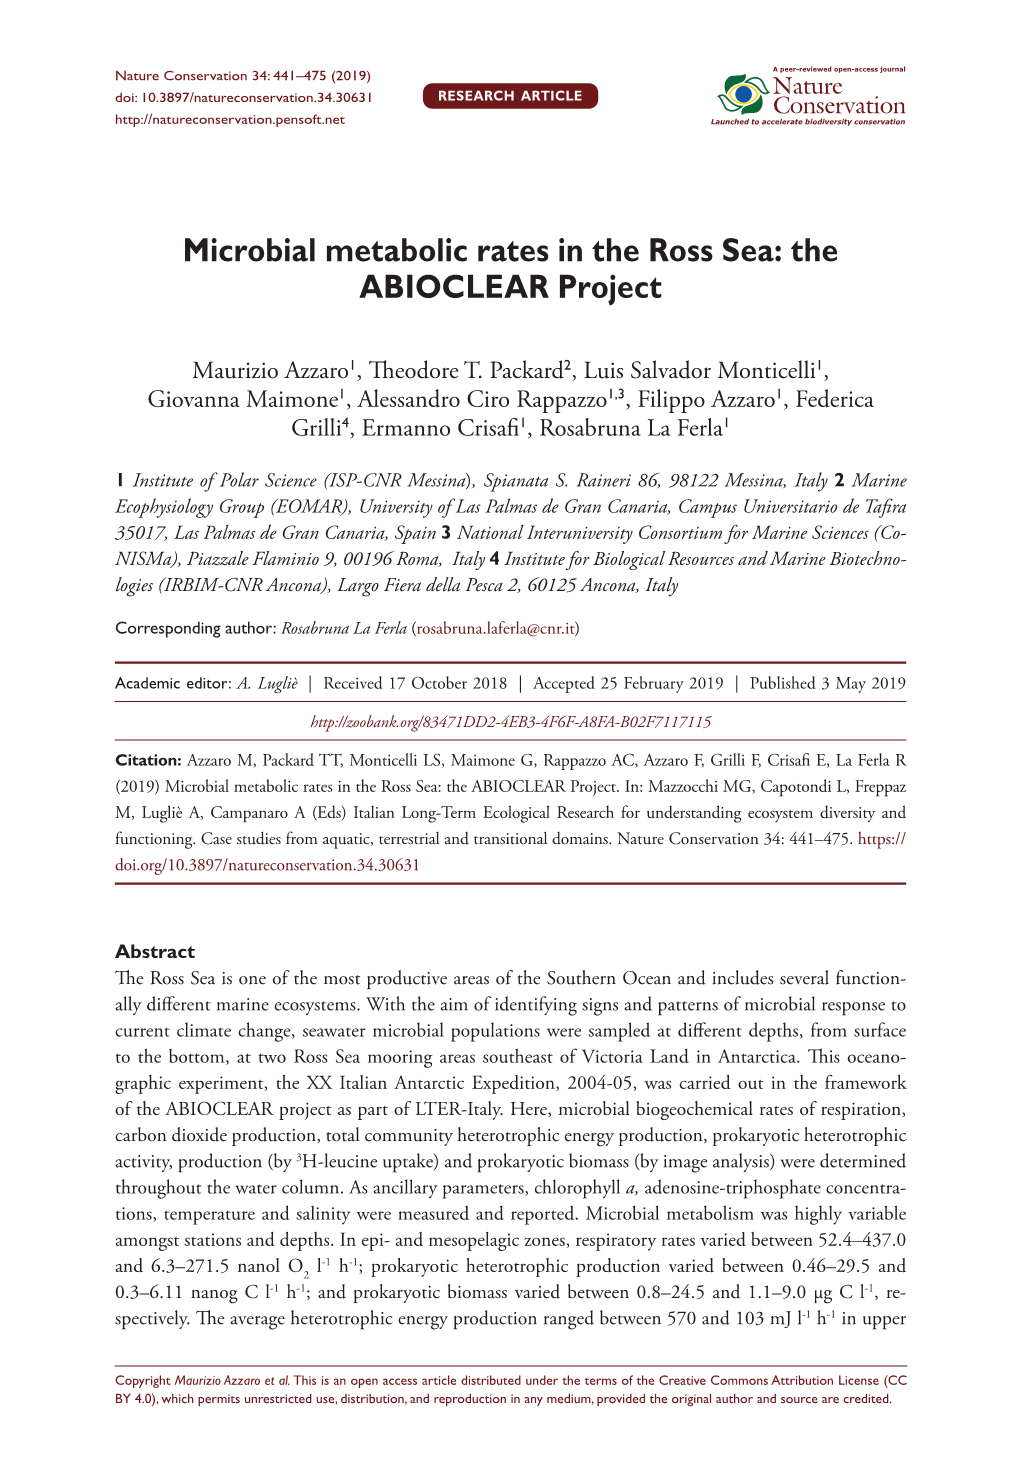 Microbial Metabolic Rates in the Ross Sea: the ABIOCLEAR Project